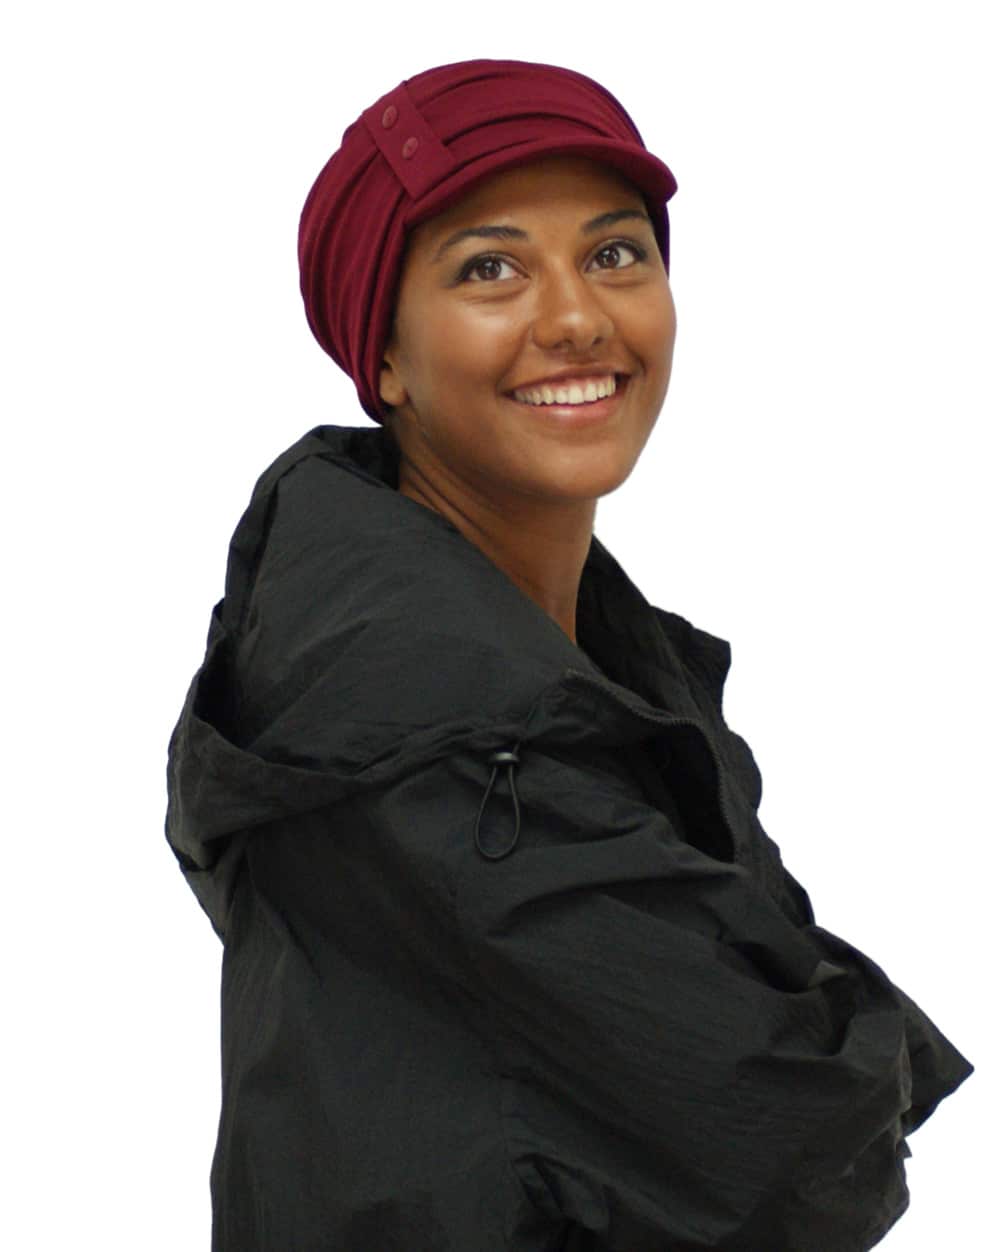 soft red chemo cap worn by young woman